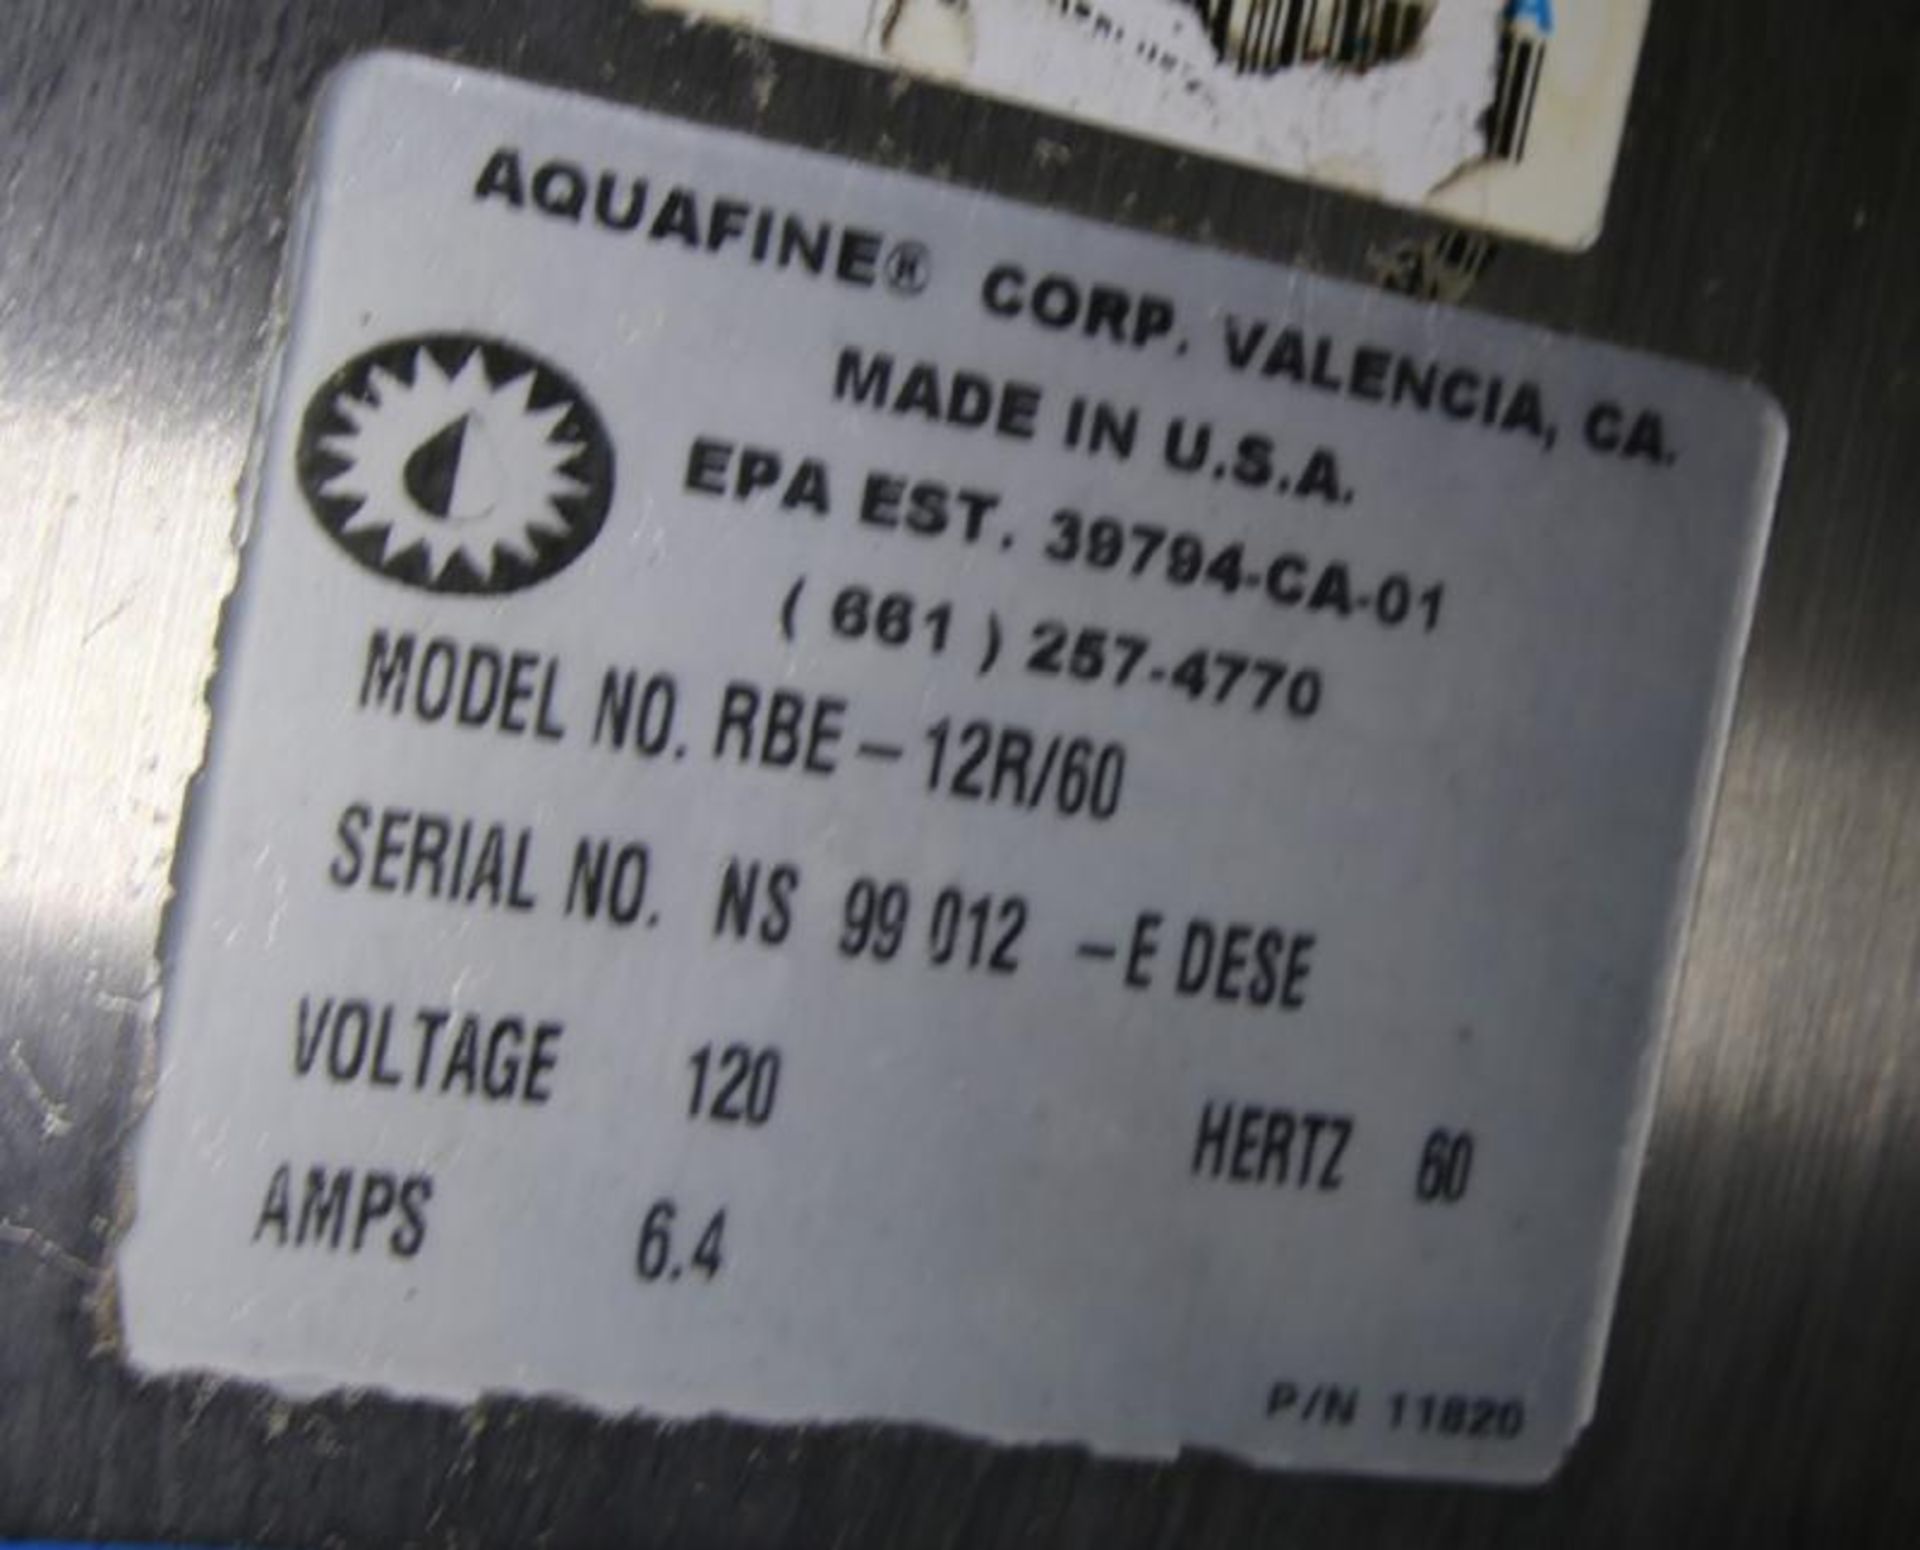 Aquafine S/S UV System, Model RBE - 12R/60, SN NS 99 012-EDESE, 120V,4" Flanged Connectors, with - Image 7 of 7